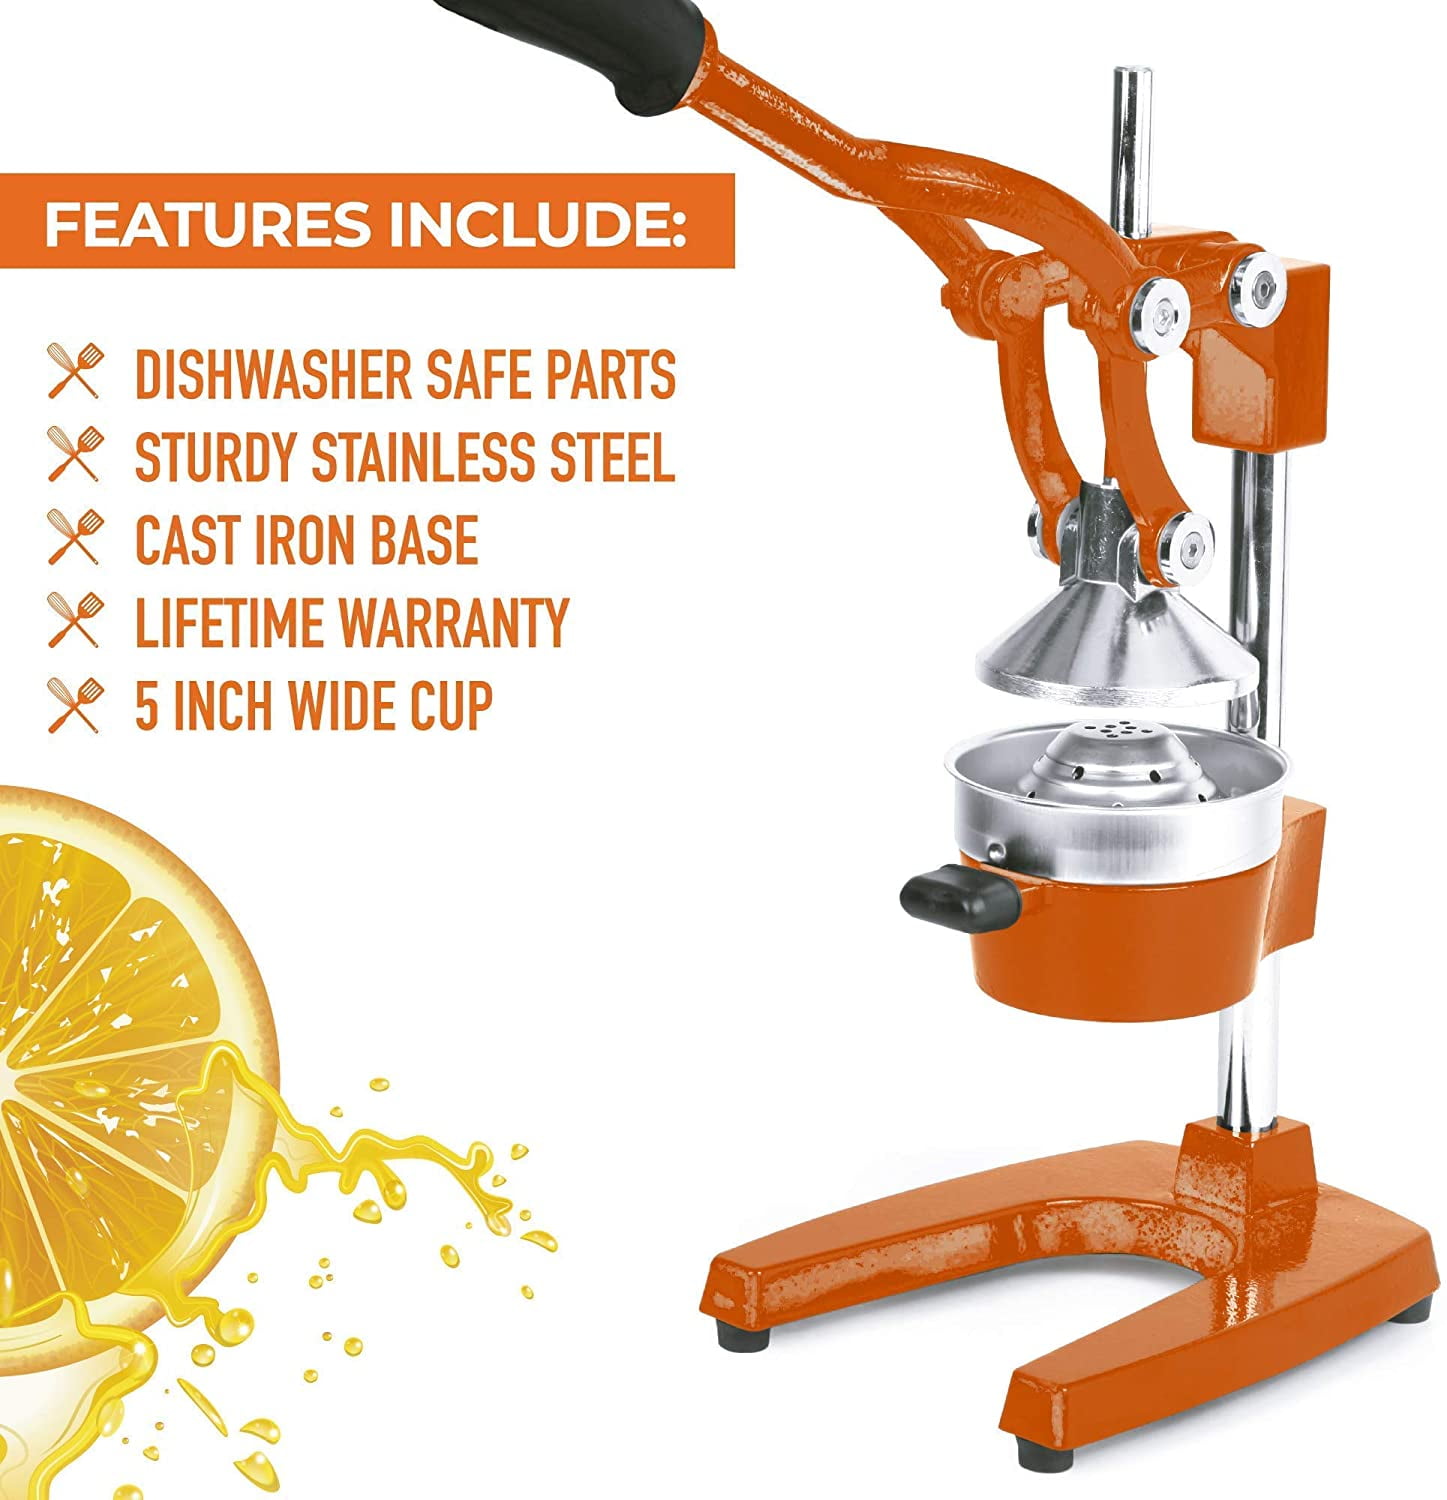 Zulay Kitchen Juice Vortex Lemon & Orange Juicer - Electric Citrus Squeezer  & Presser - Rechargeable Juicer Machine - Wireless Portable Juicer - USB  Charger & Cleaning Brush Included (Blue/White) 